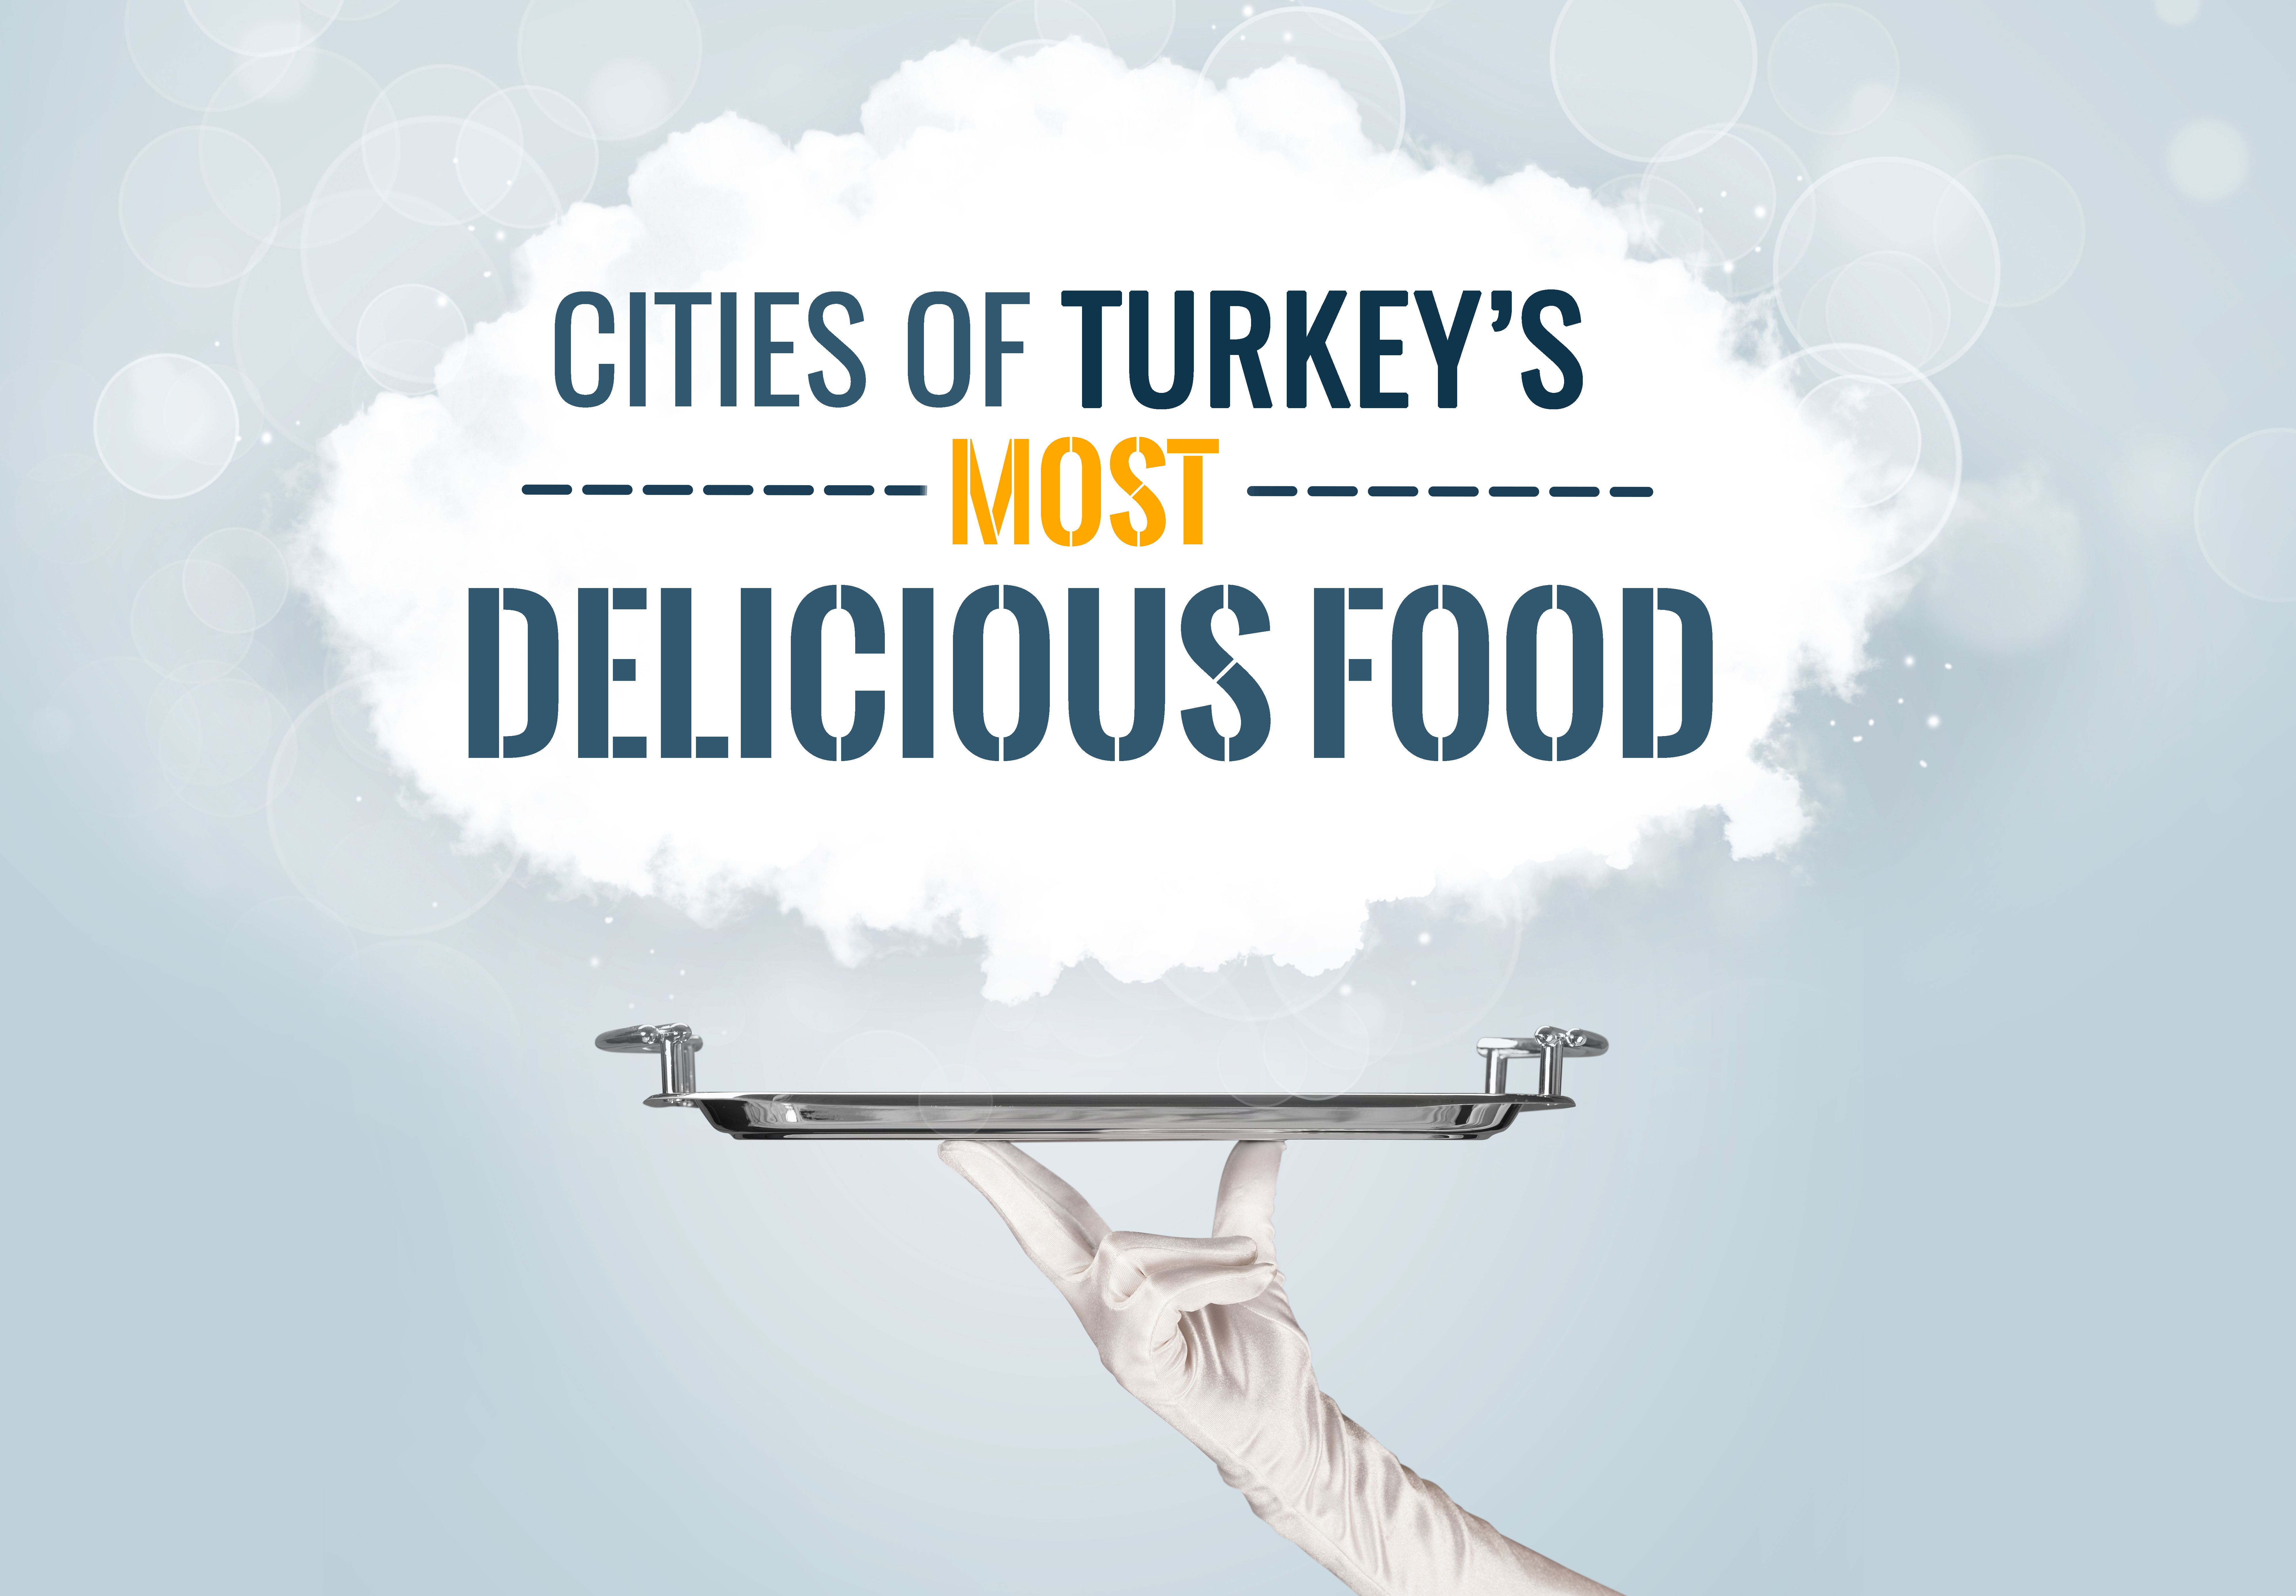 Cities of Turkey's Most Delicious Food